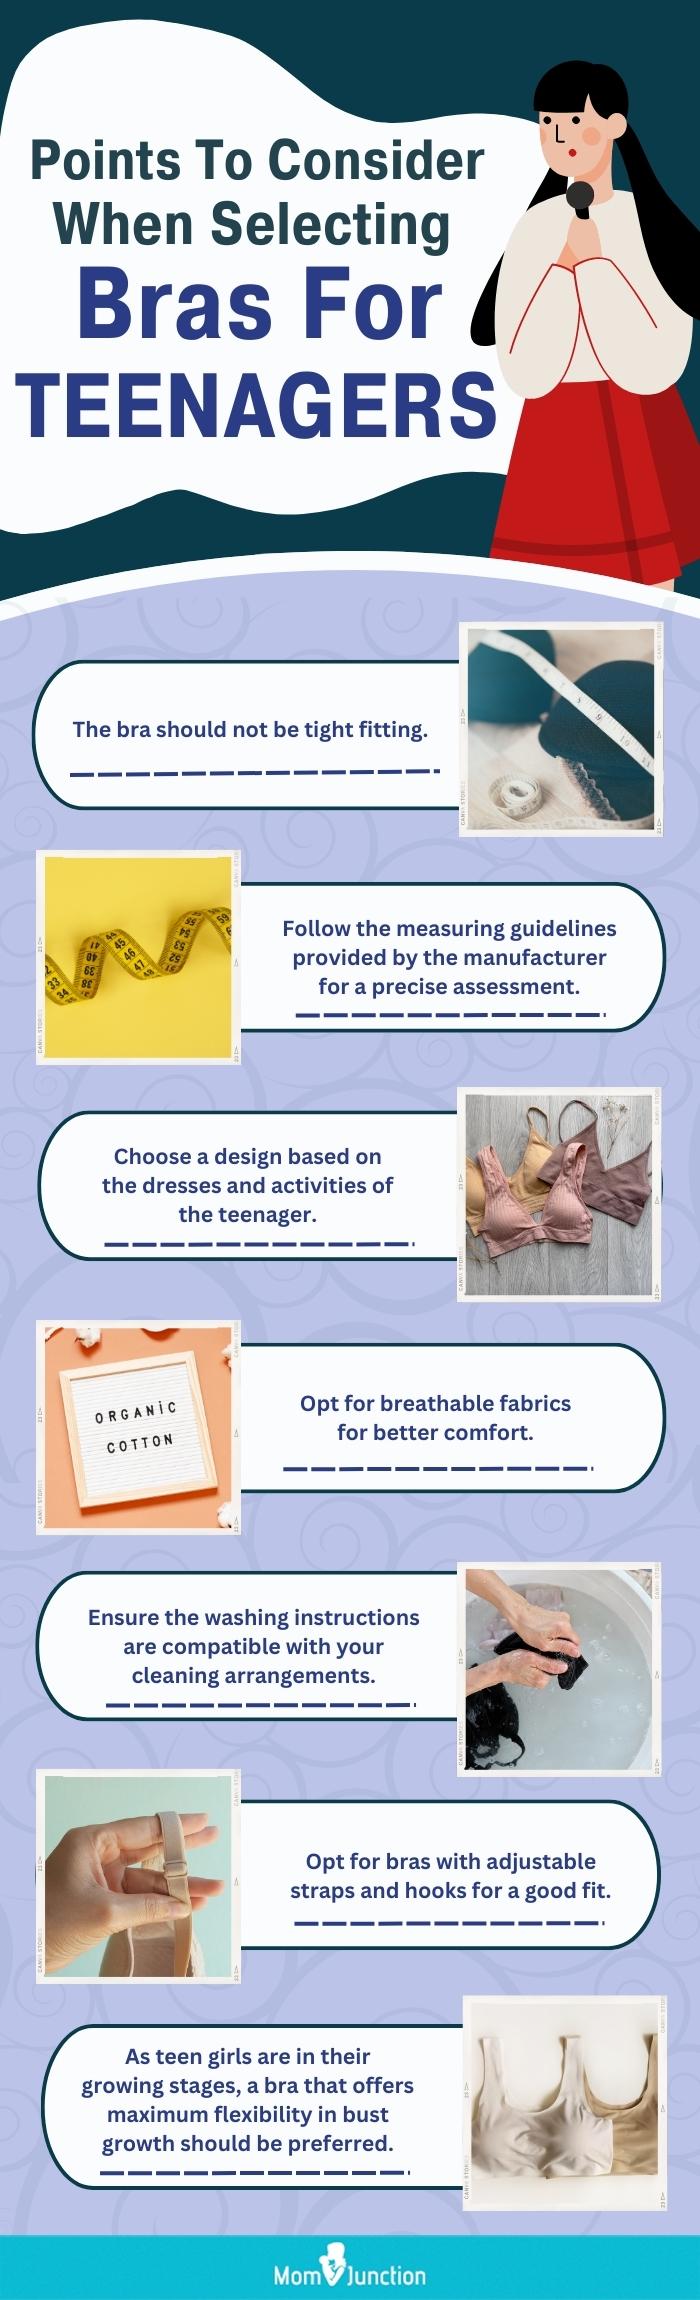 Points To Consider When Selecting Bras For Teenagers 212 Content Topics